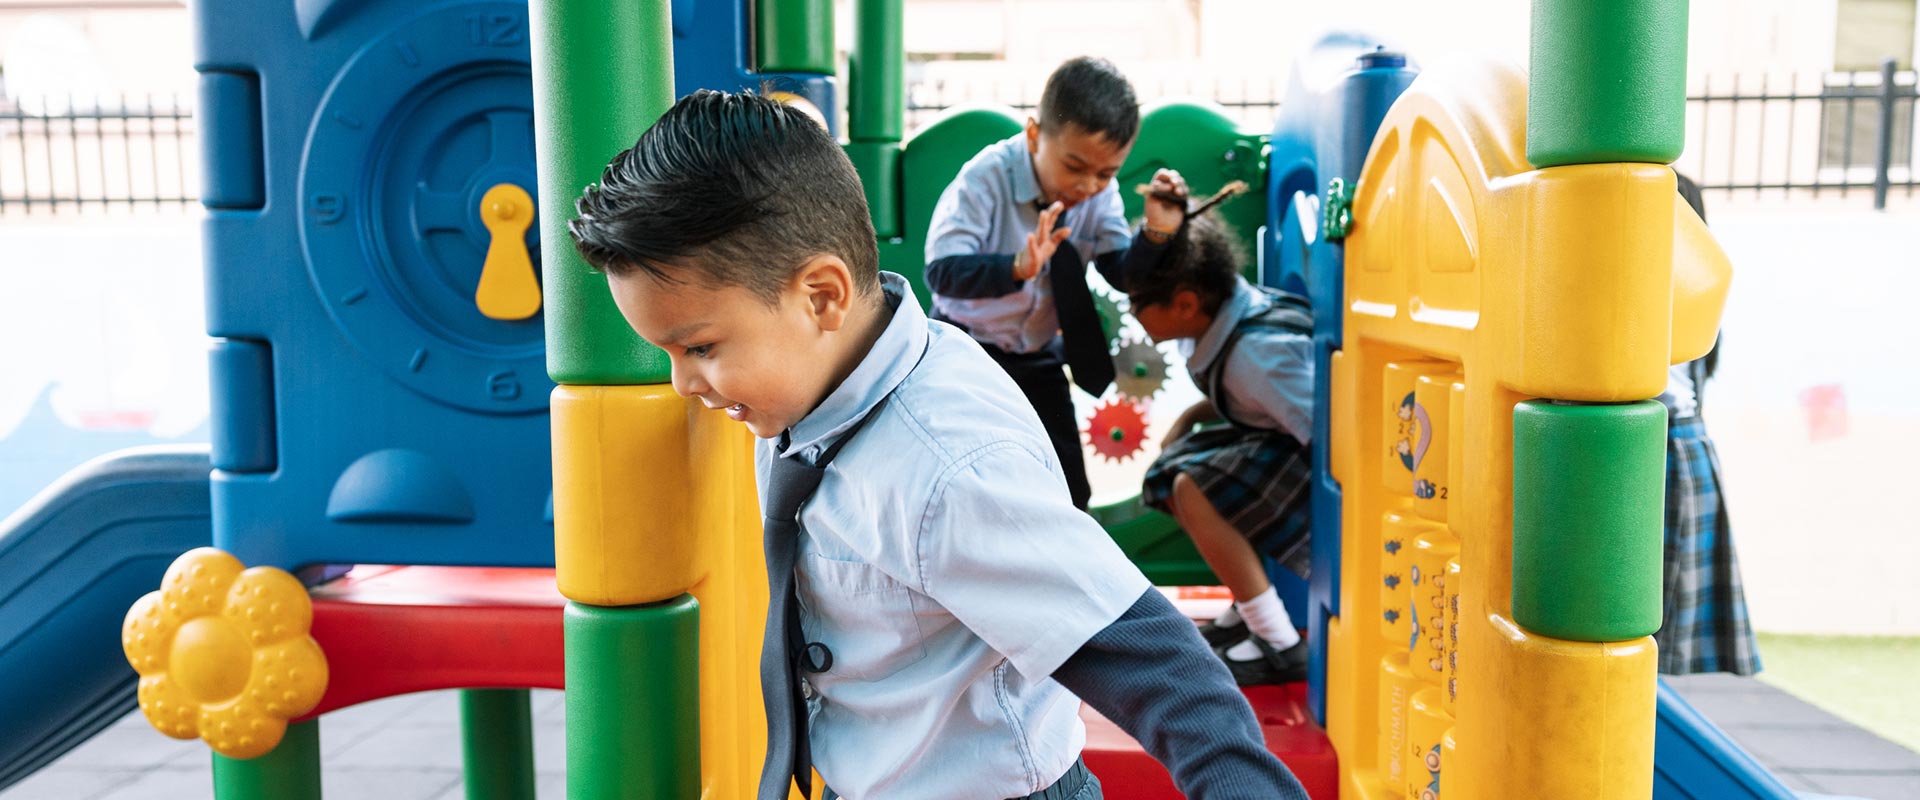 St. Raphael students playing in playground